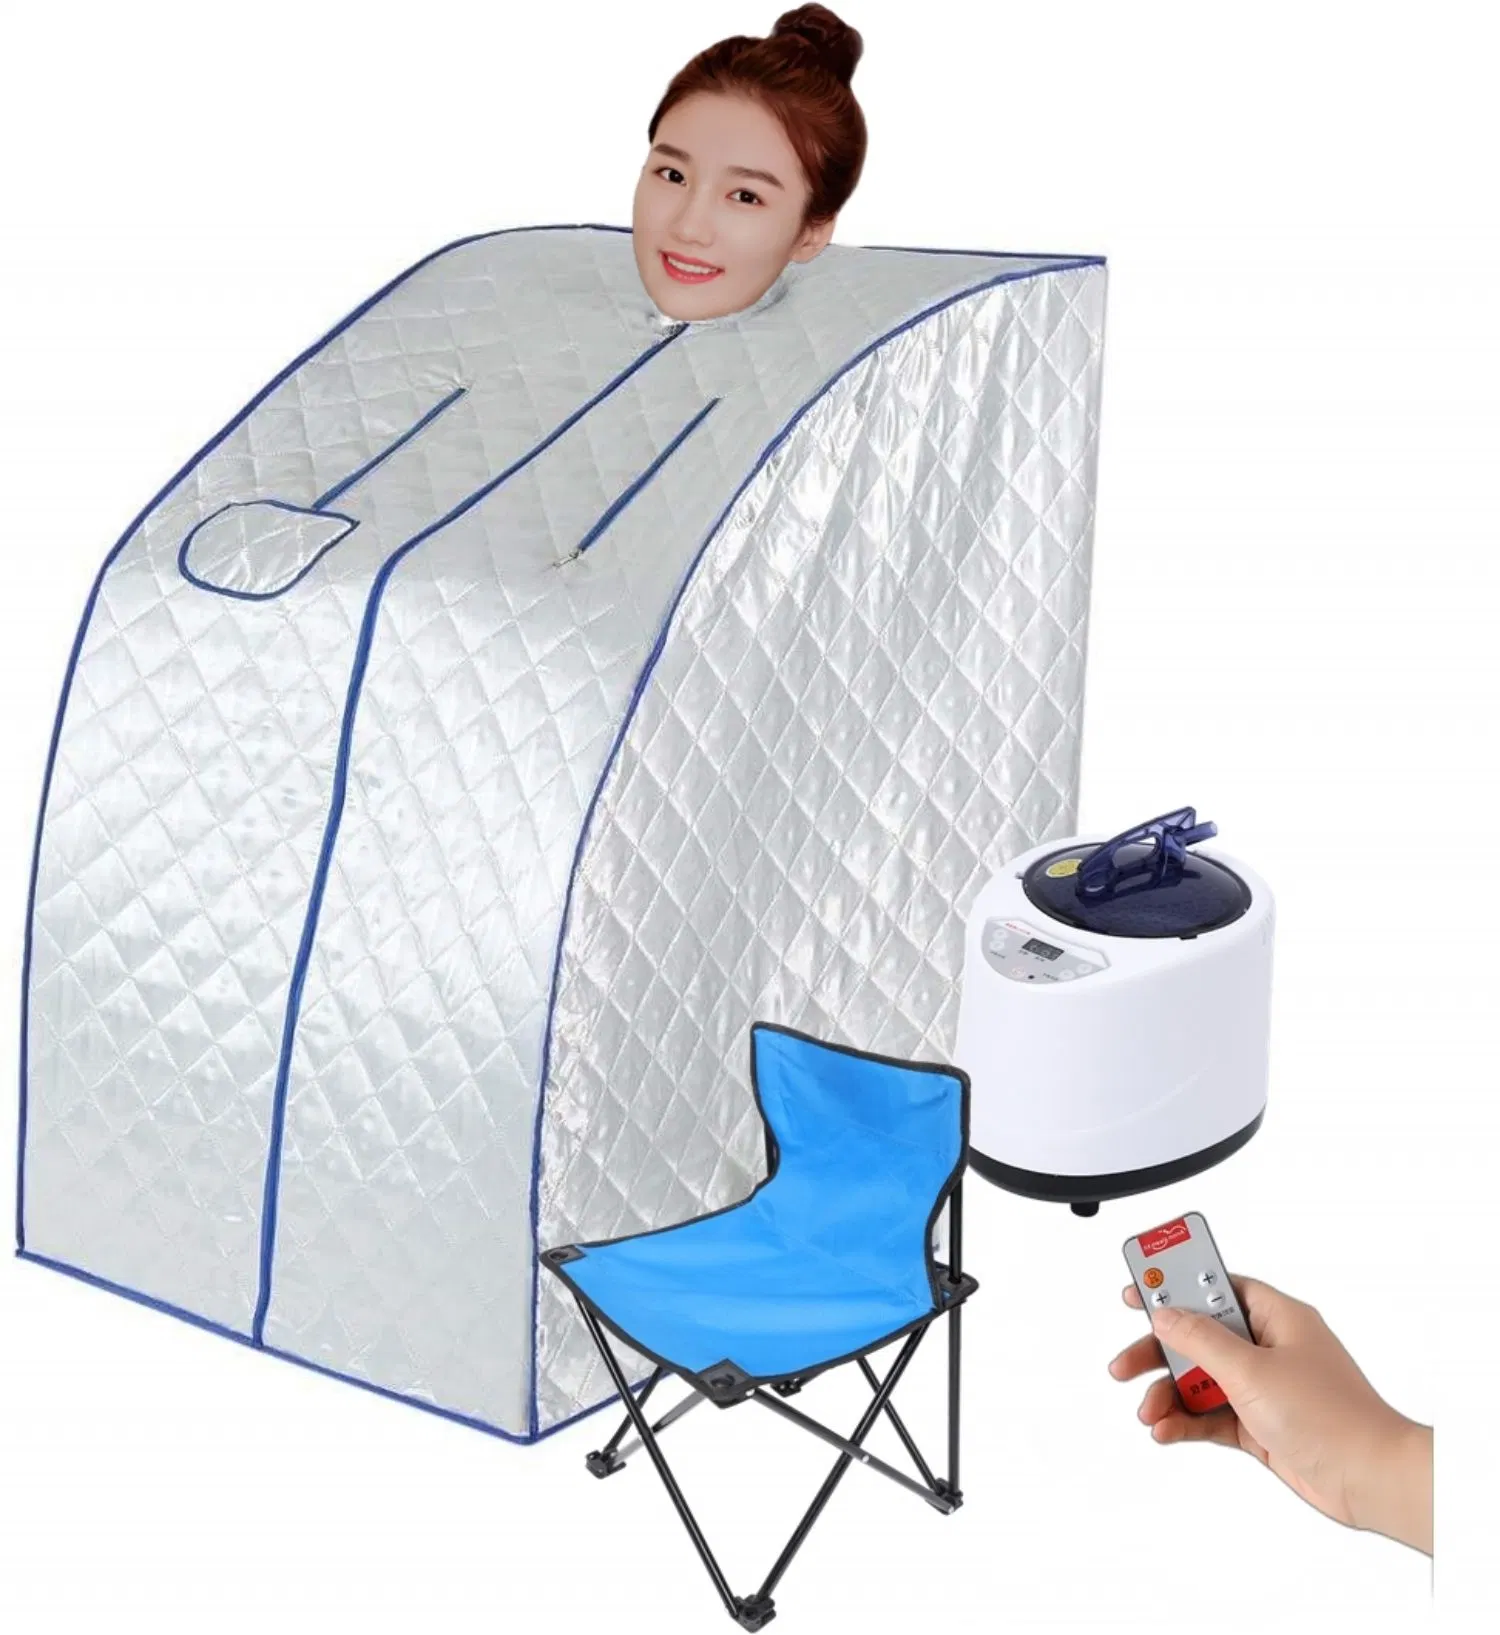 Portable Steam Sauna for Home All-in-One Personal SPA